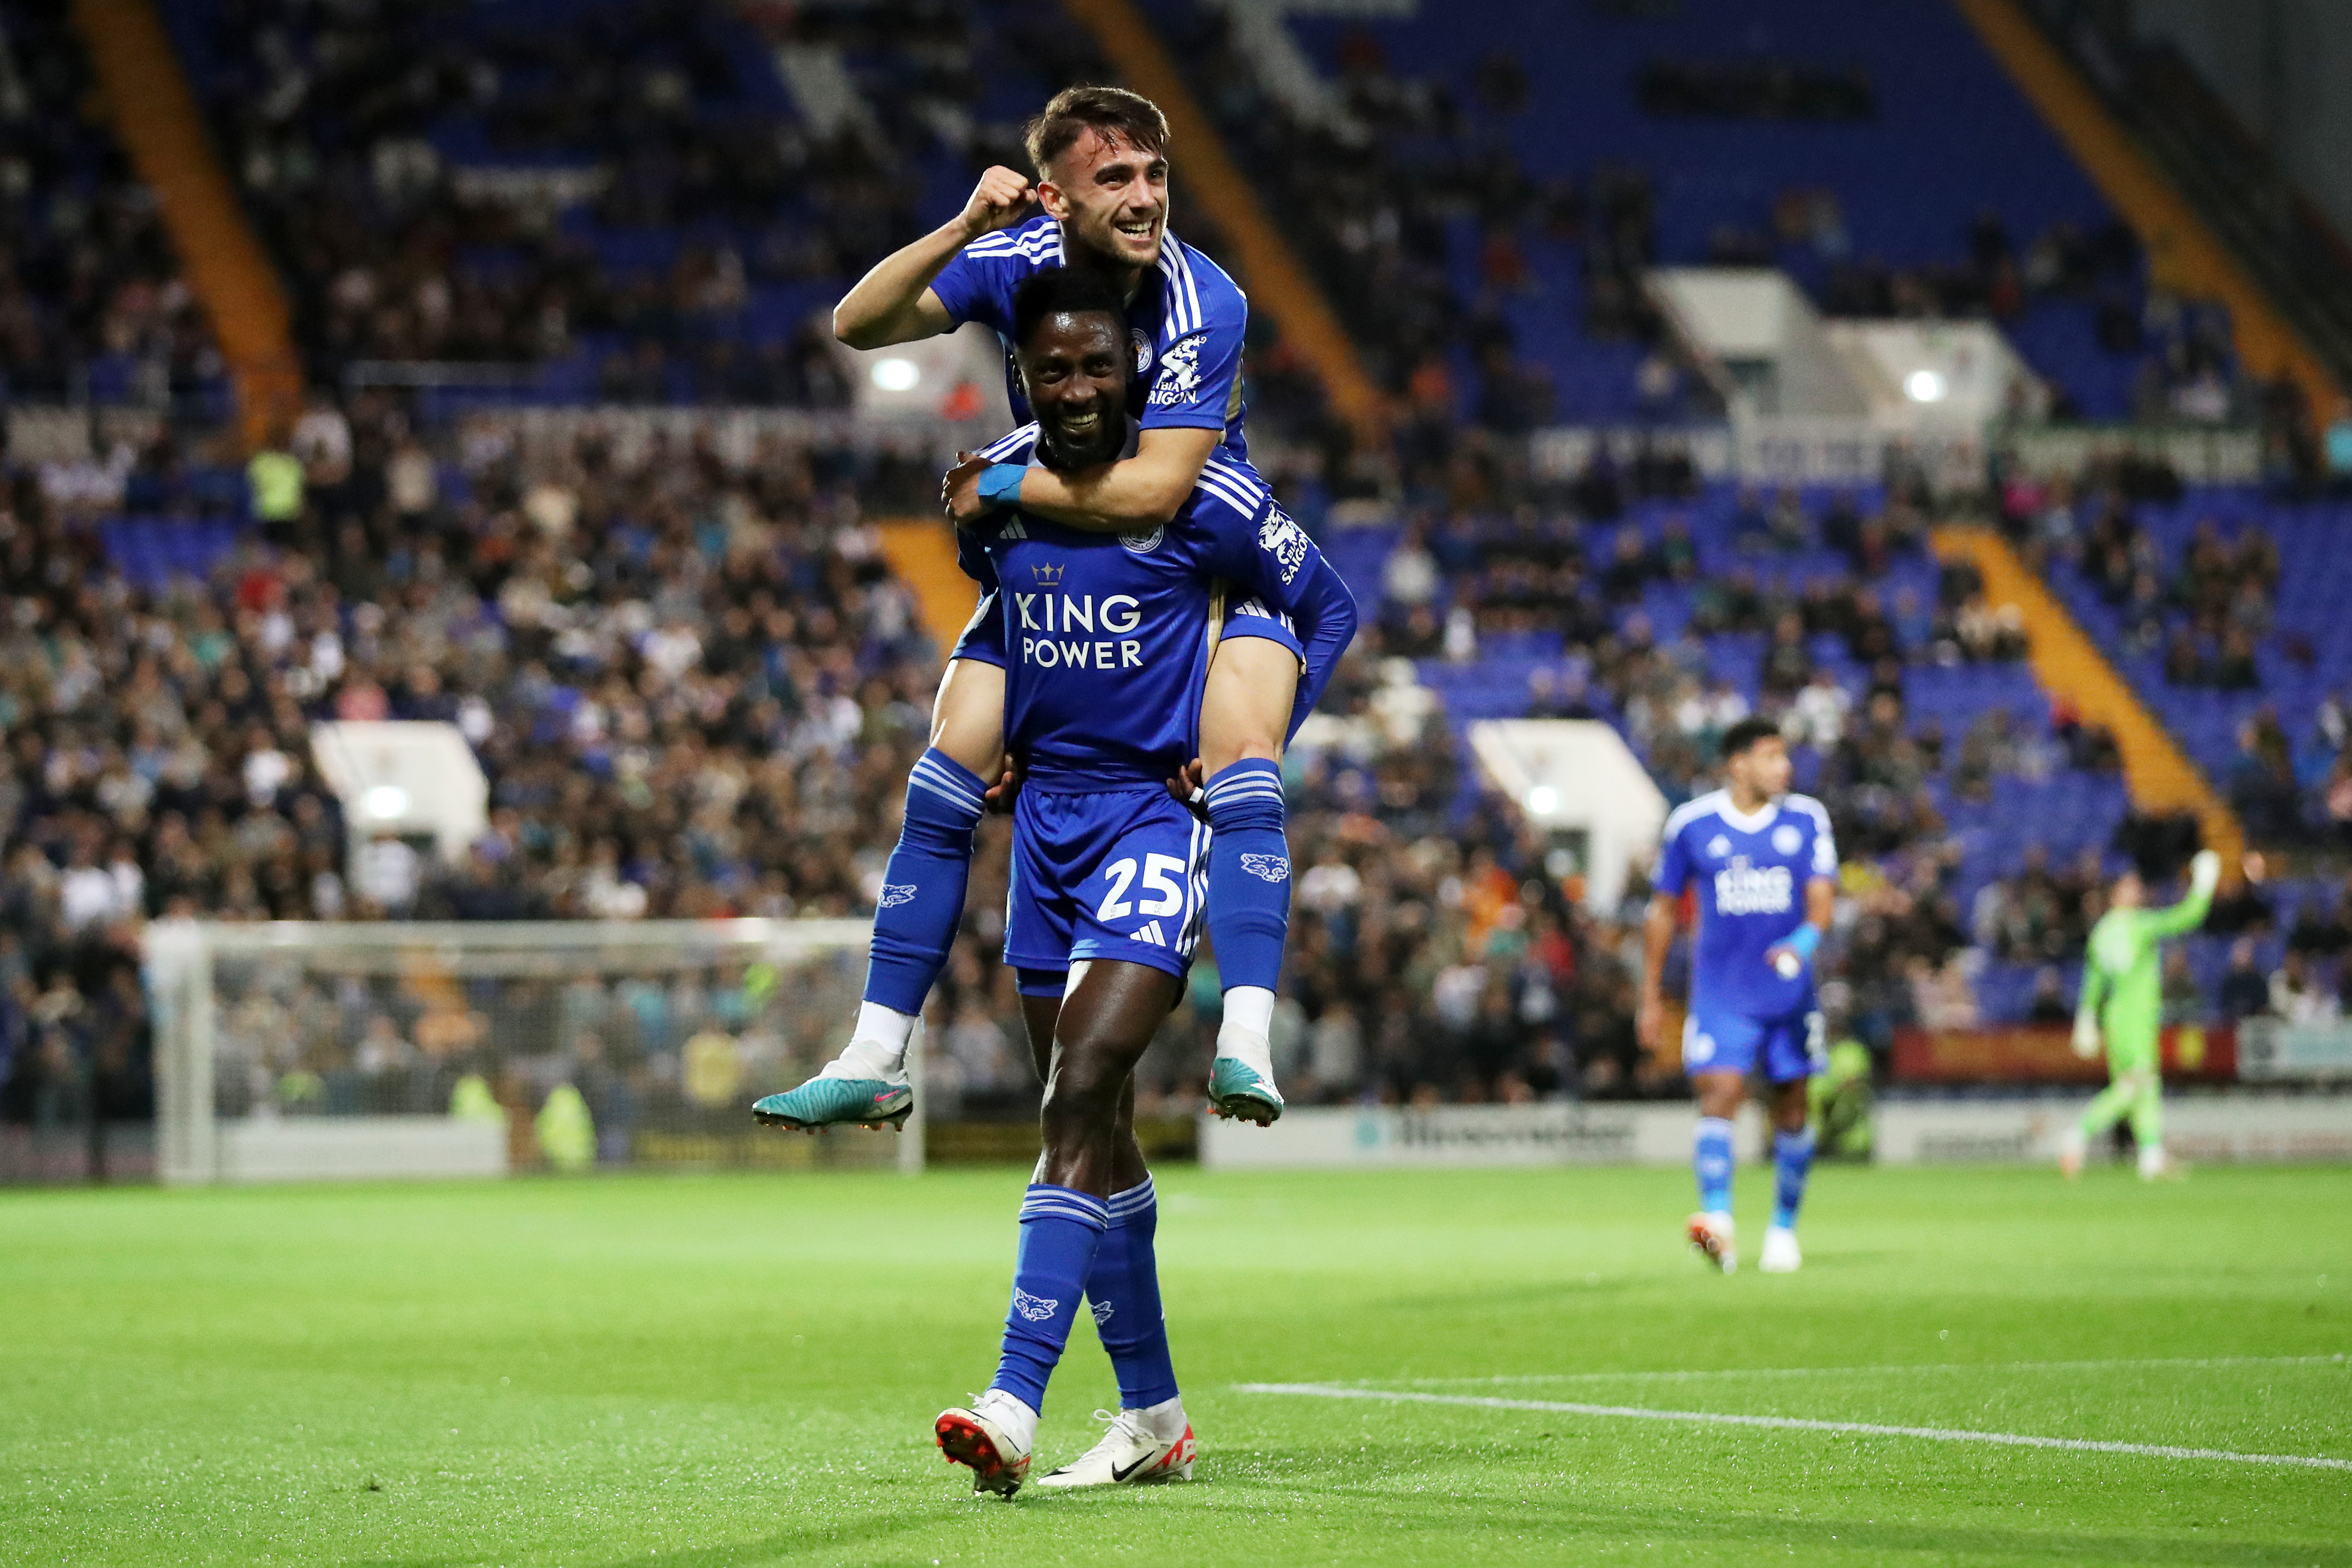 Tranmere Rovers v Leicester City - Carabao Cup Second Round